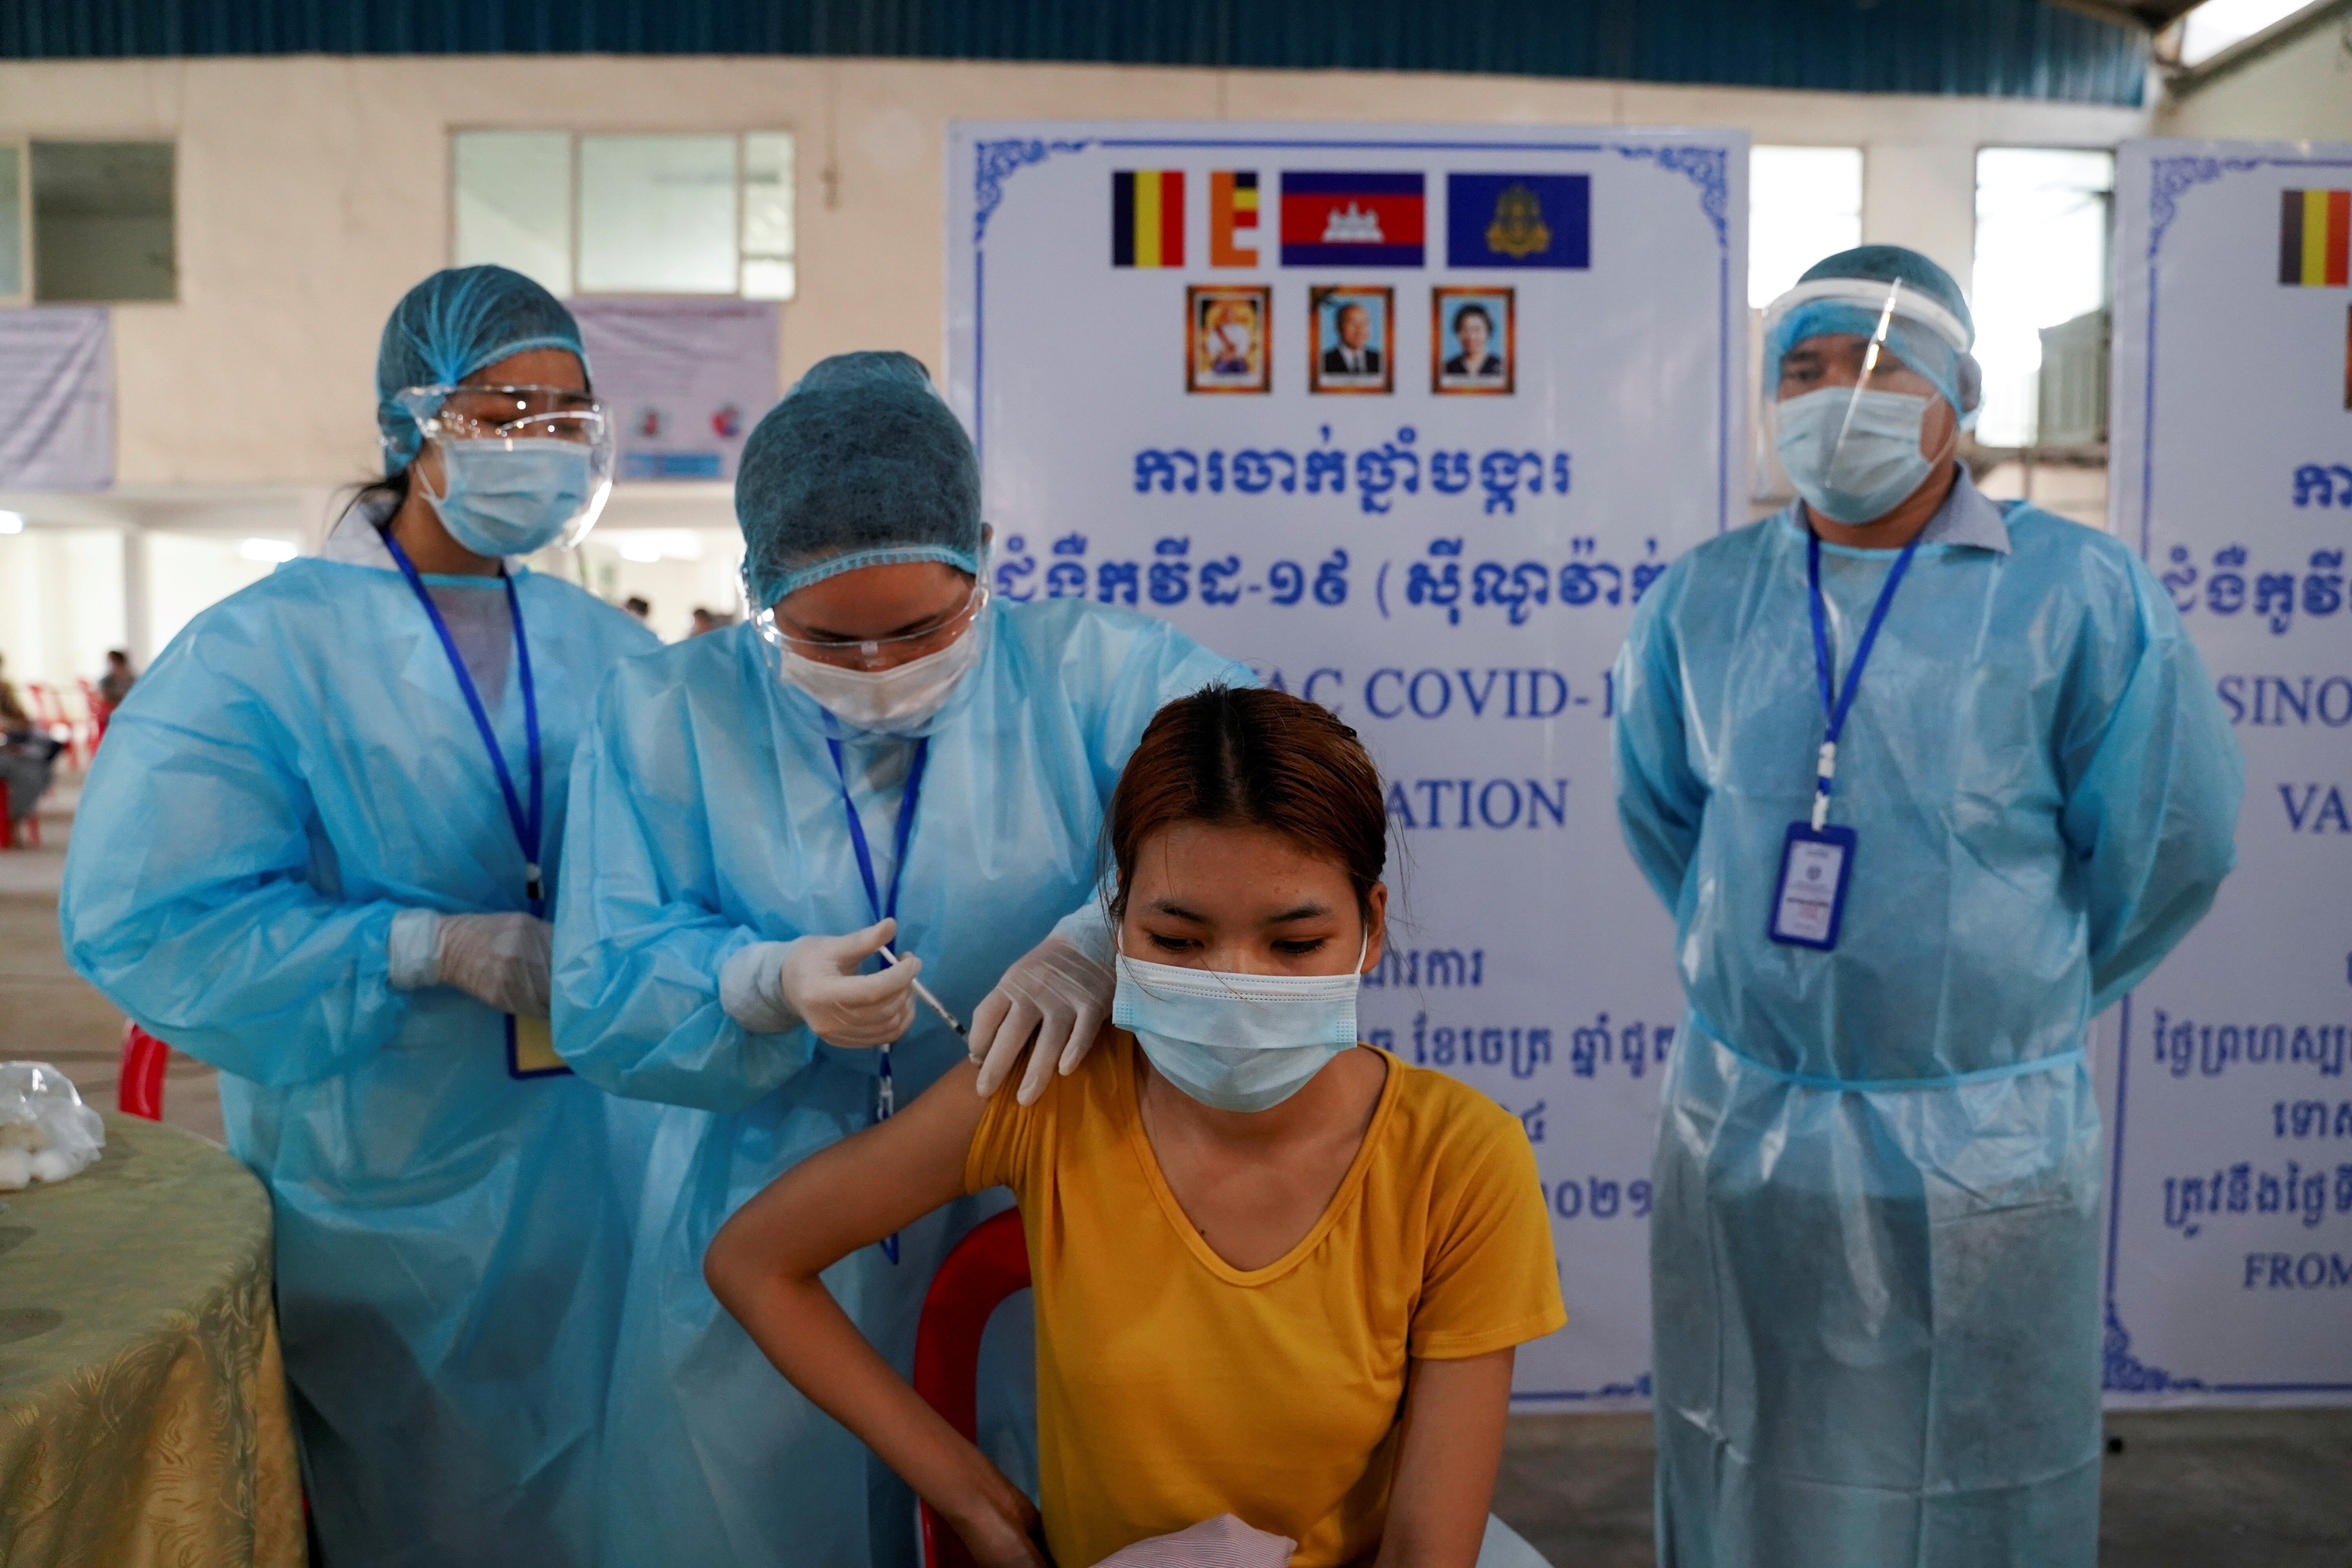 A garment factory worker receives a dose of Sinovac’s Covid-19 vaccine at an industrial park in Phnom Penh earlier this year. Photo: Reuters